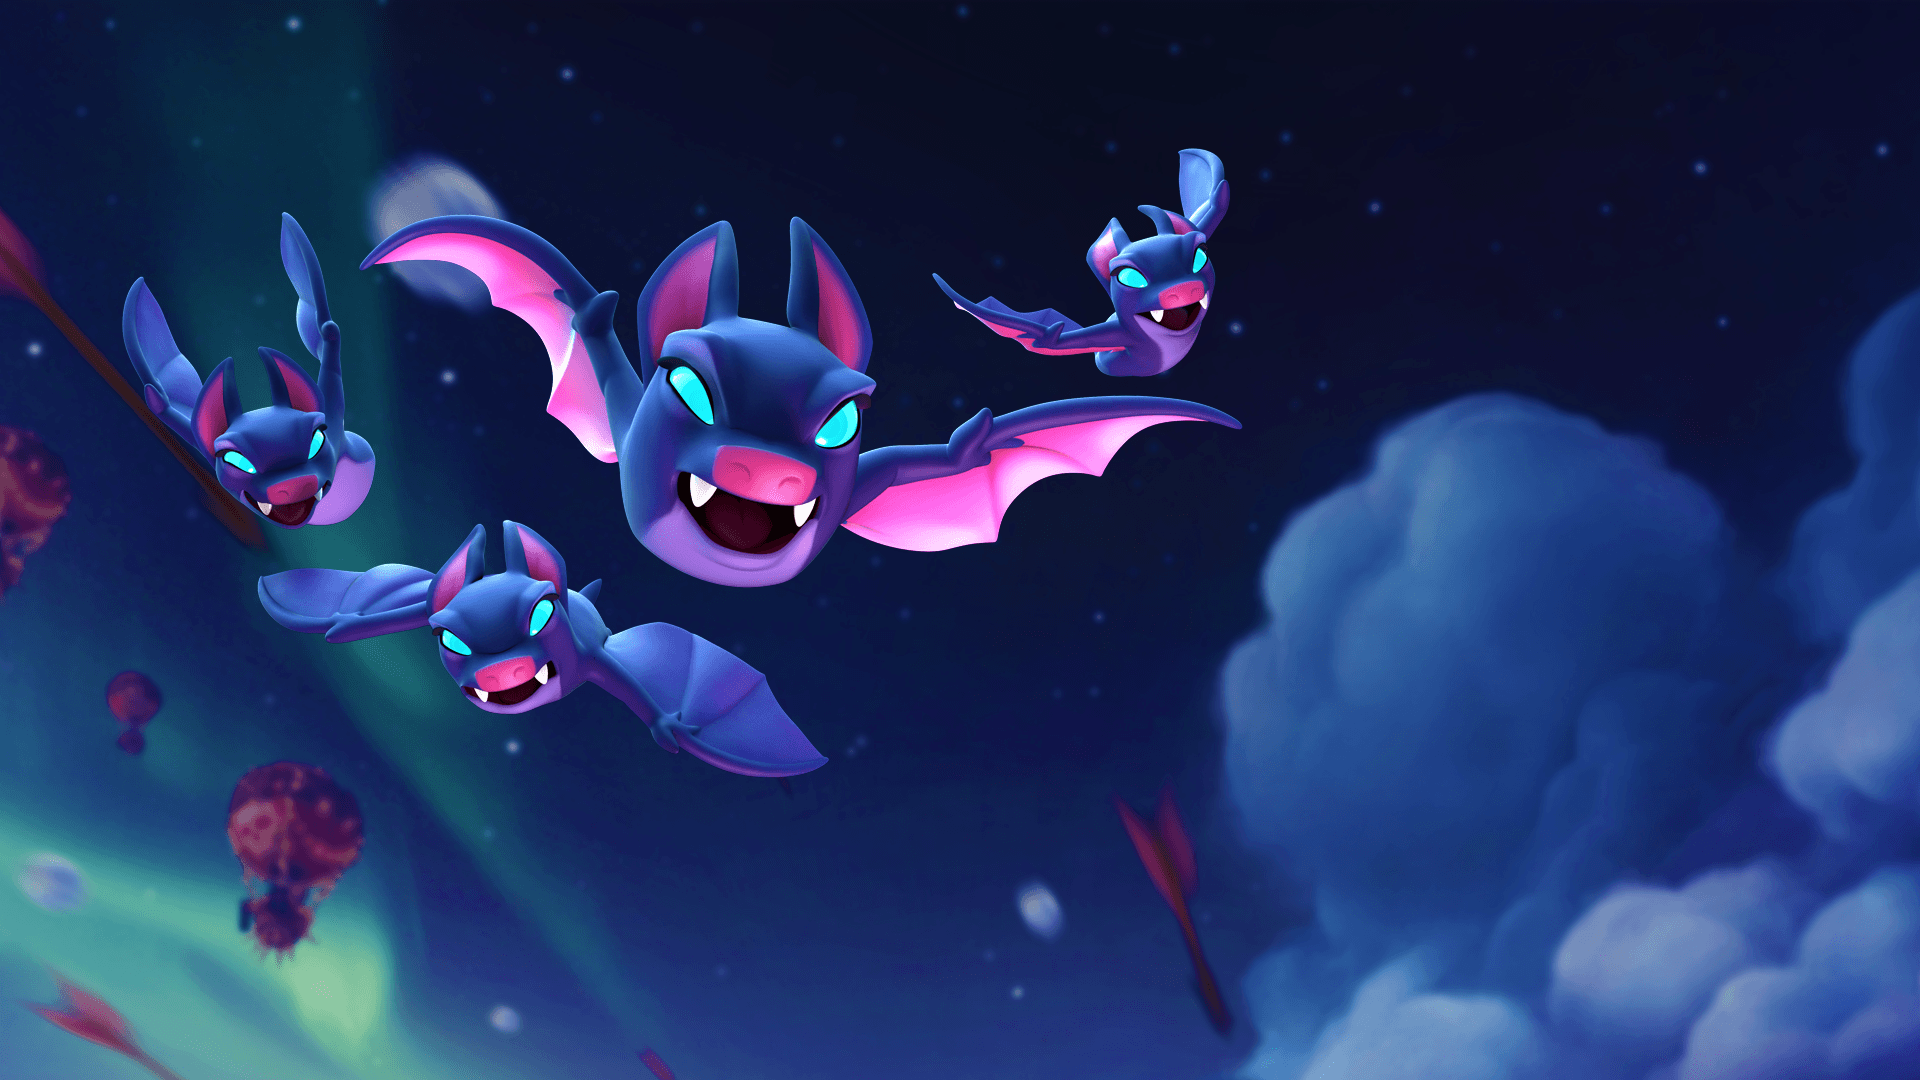 Bats 1080p Wallpaper for Computer uncompressed in comments